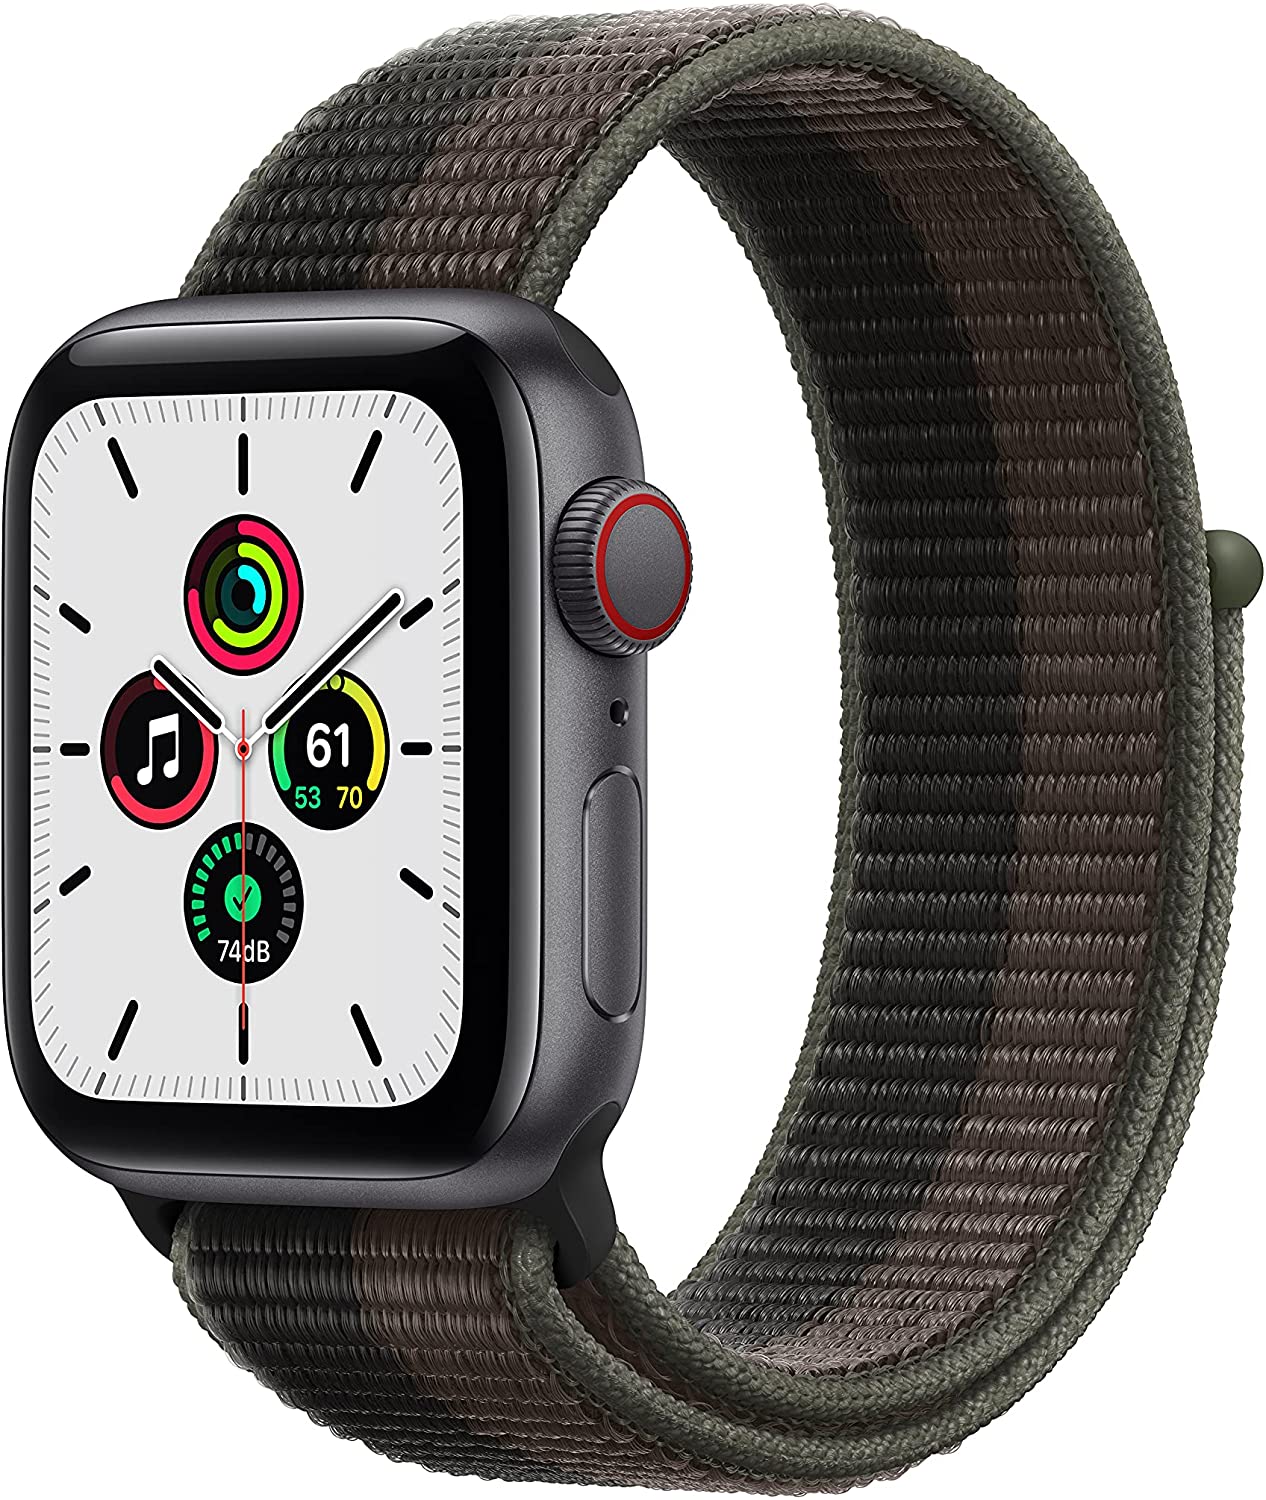 (Open Box) Apple Watch SE GPS + Cellular, 40mm Space Gray Aluminum Case with Tornado/Gray Sport Loop